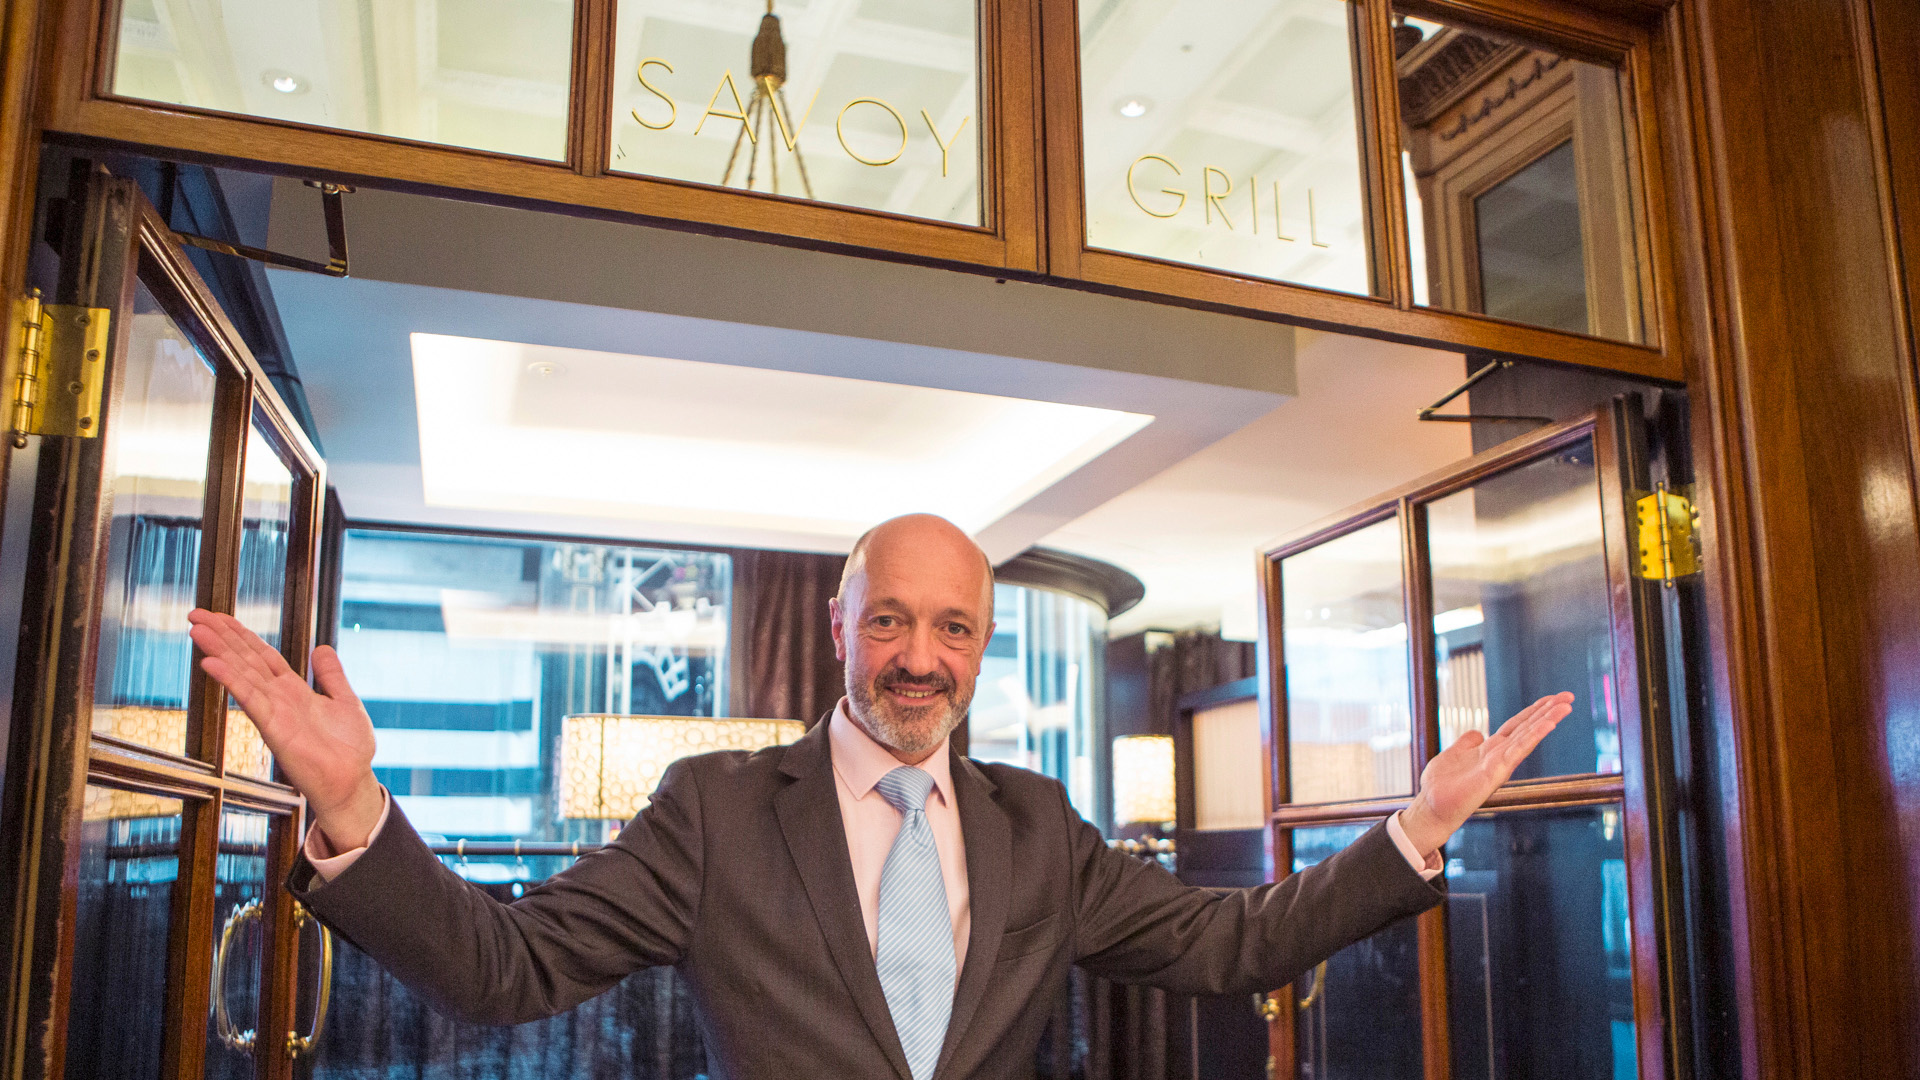 THE SAVOY - A hotel filled with glamour, elegance, history and character and truly the first luxury hotel in Britain